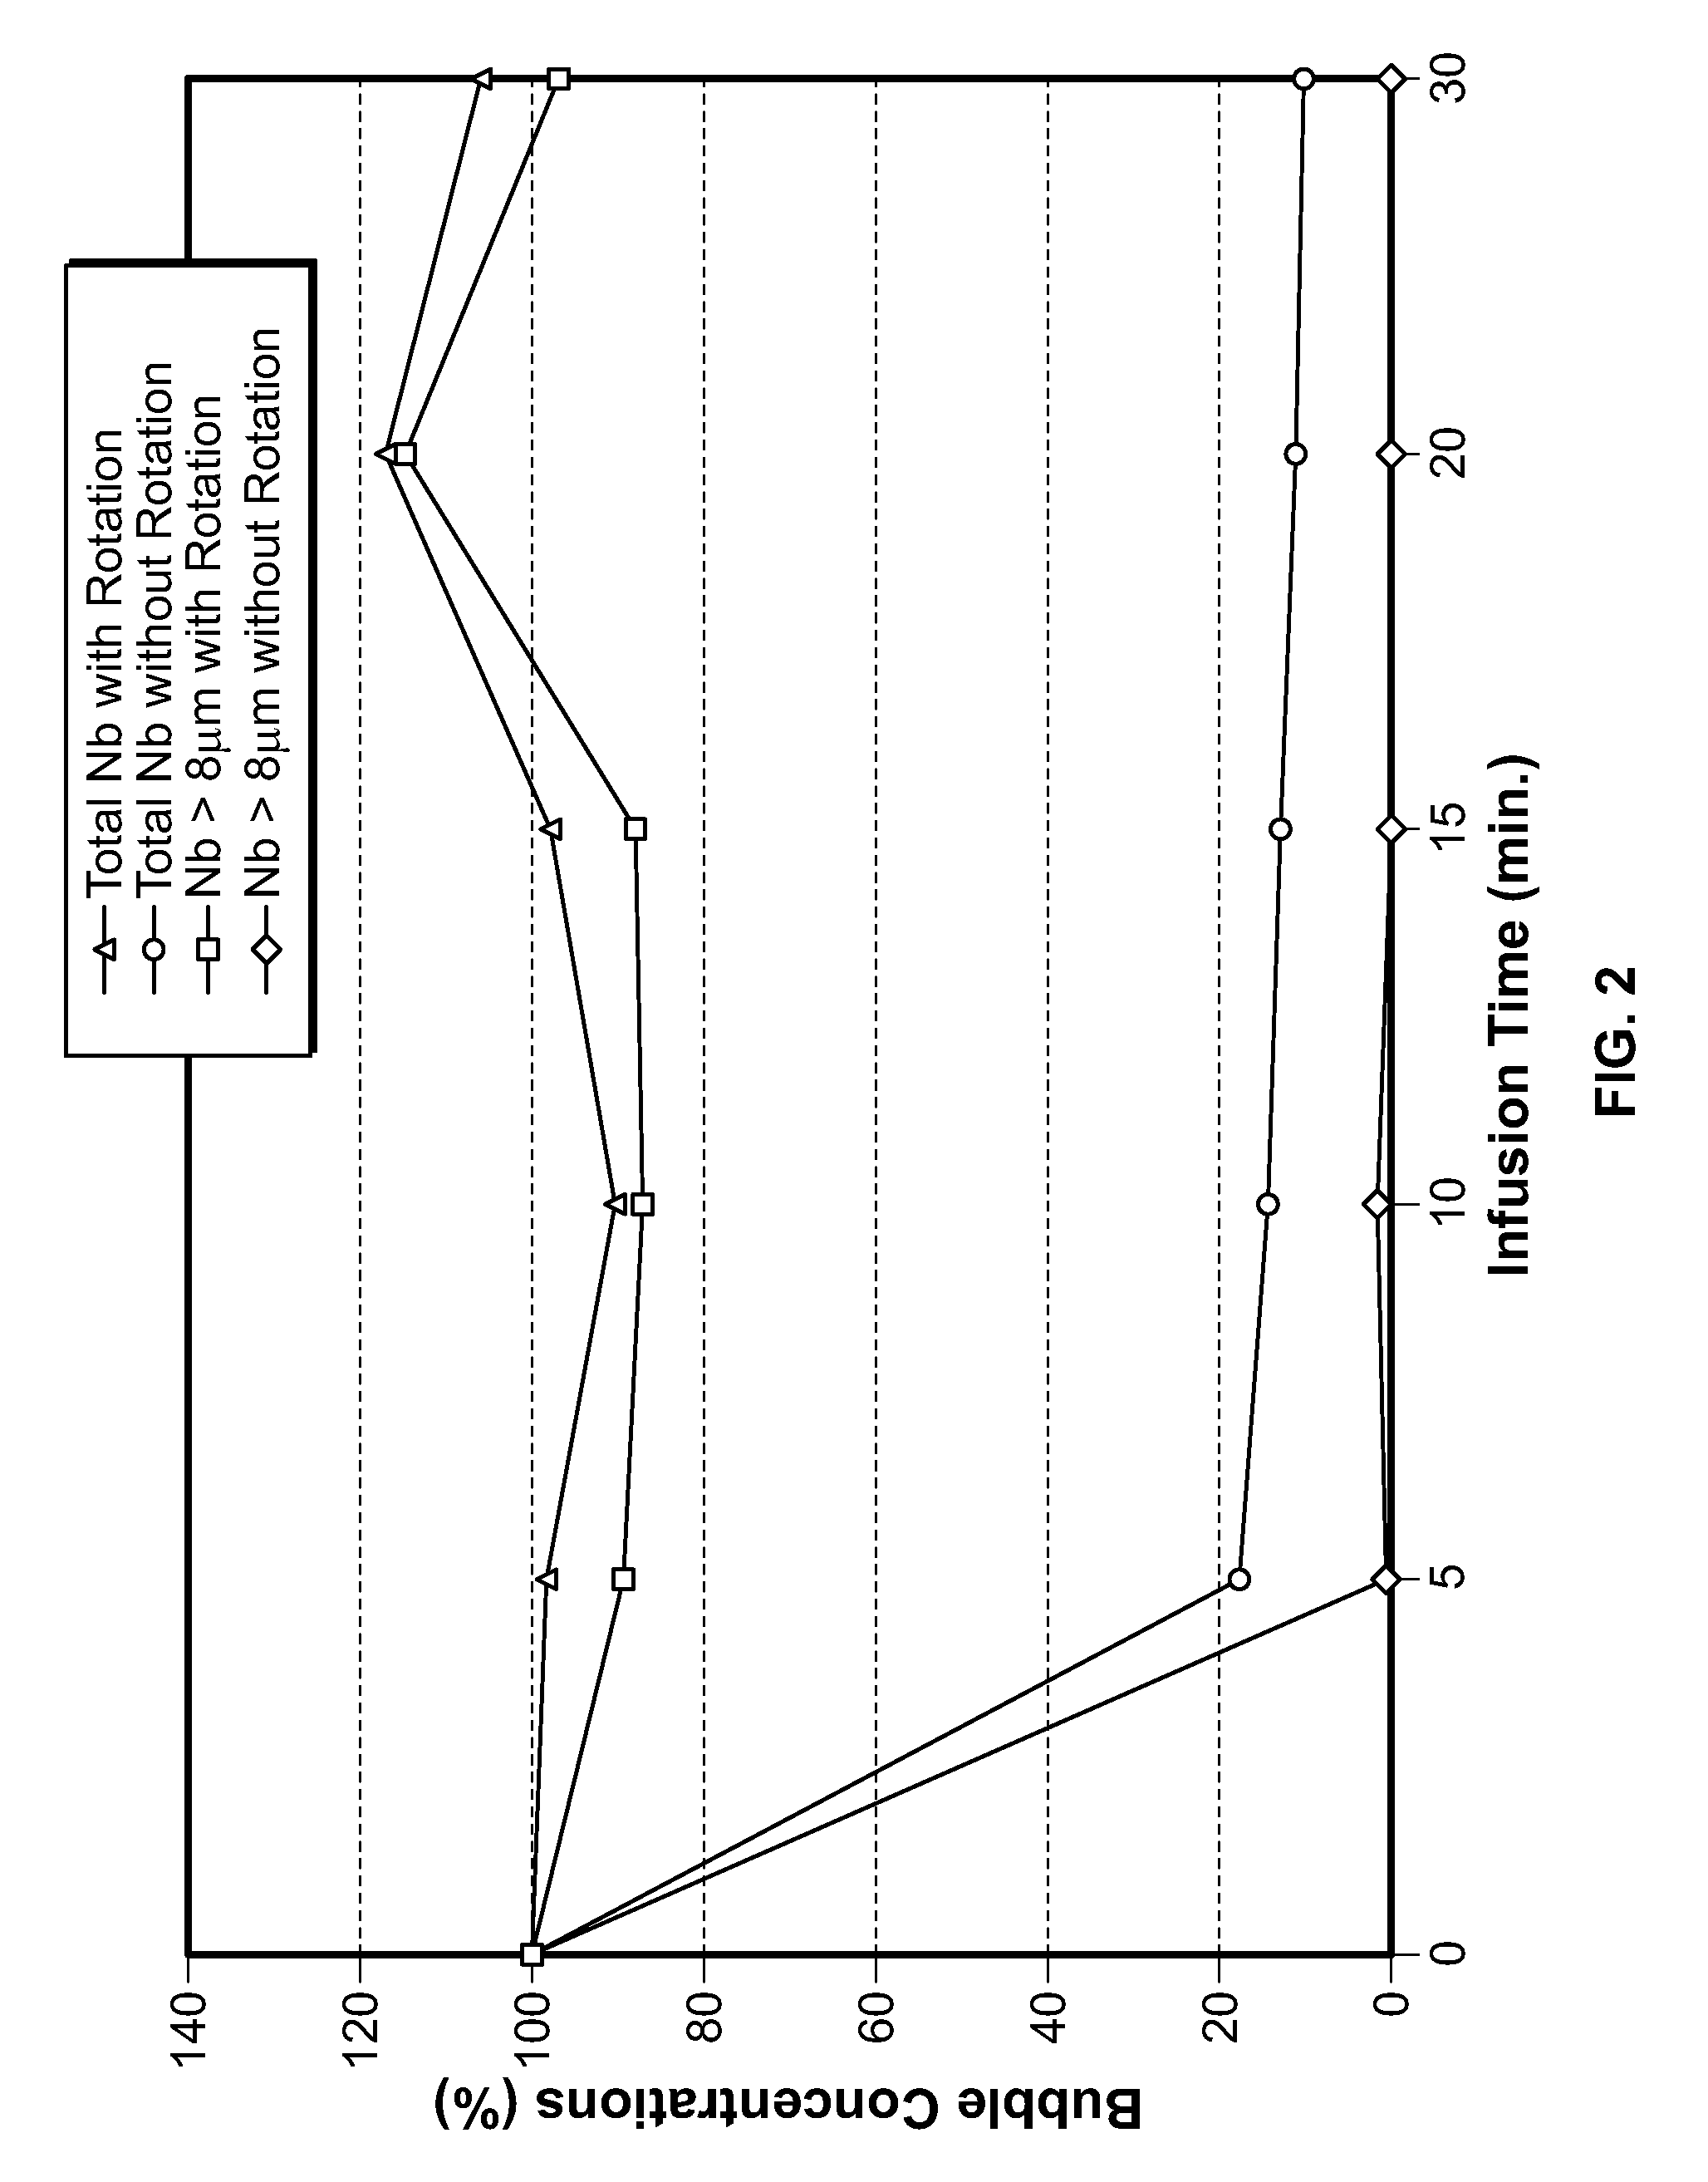 Automatic Liquid Injection System and Method